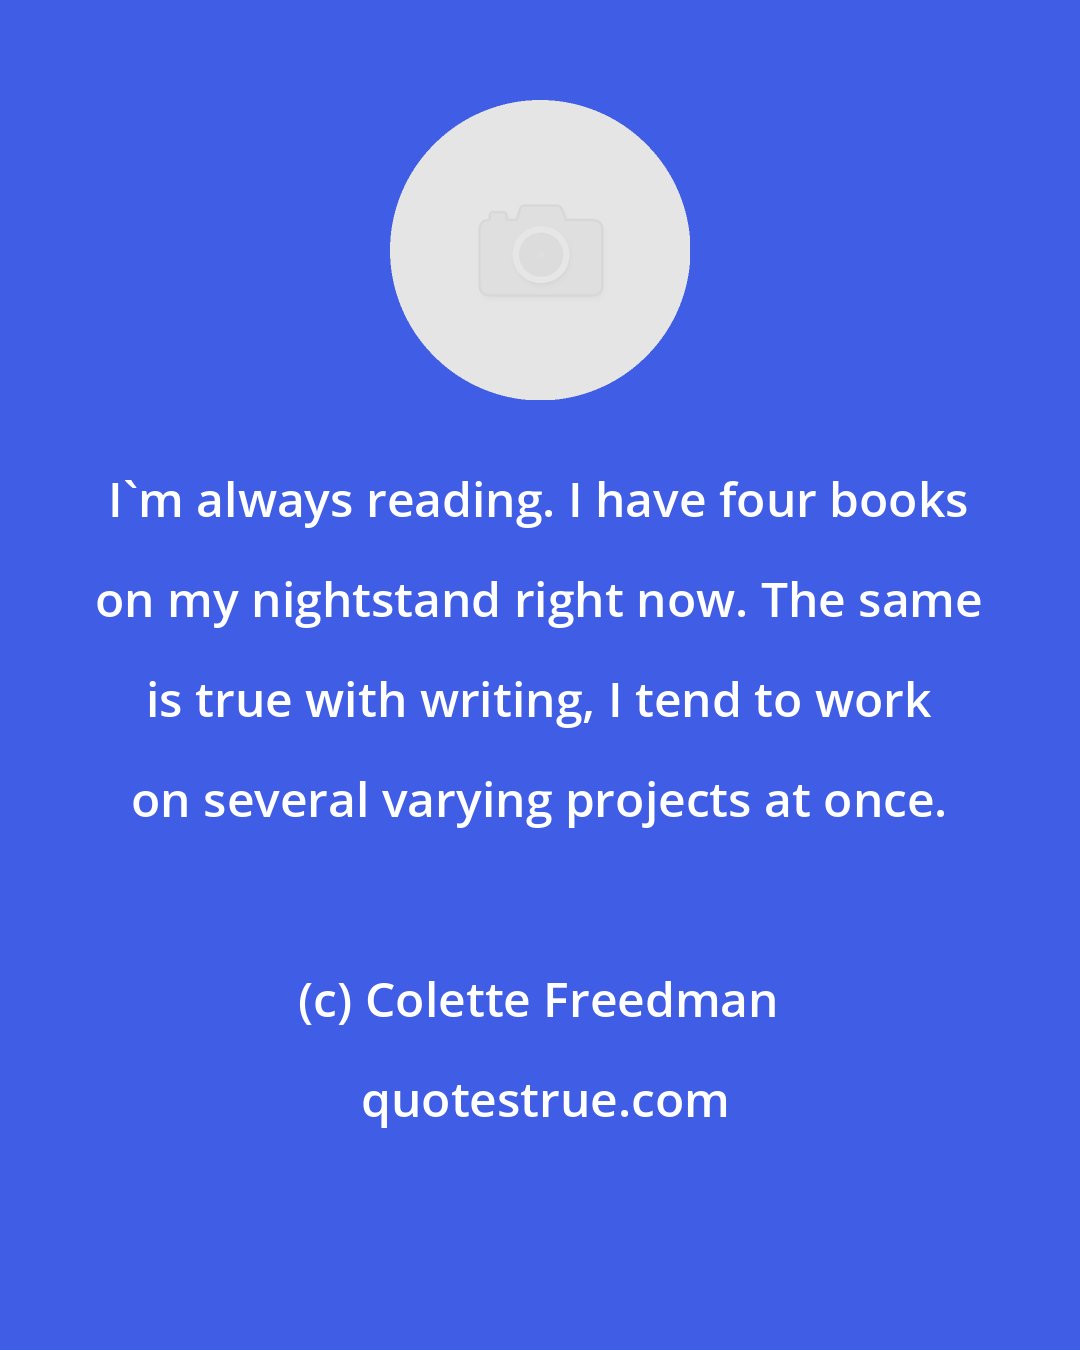 Colette Freedman: I'm always reading. I have four books on my nightstand right now. The same is true with writing, I tend to work on several varying projects at once.